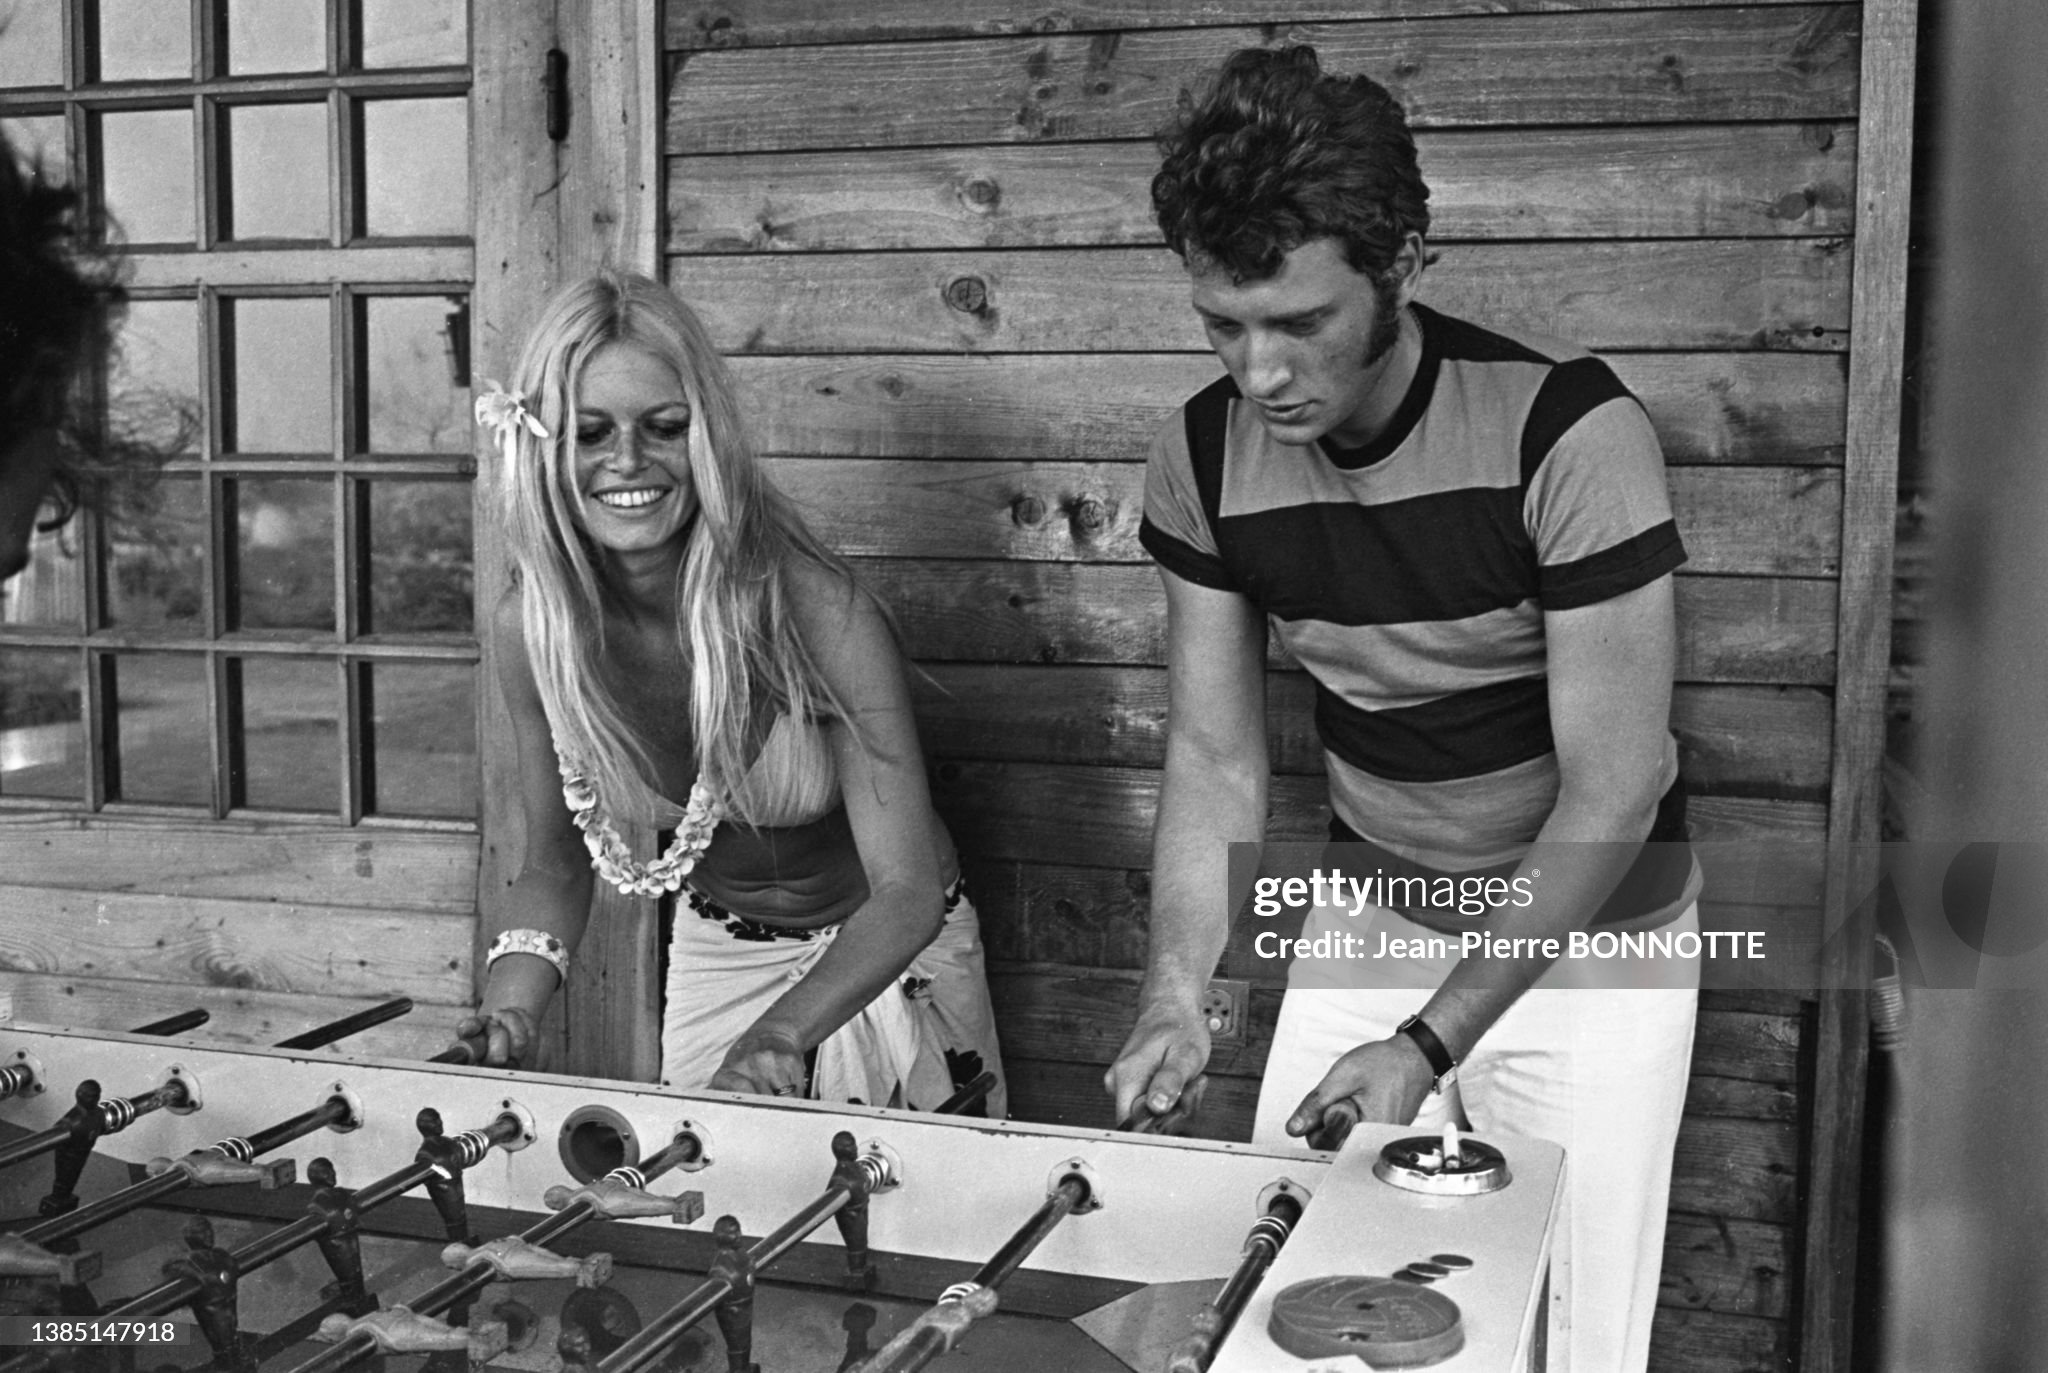 Brigitte Bardot in a bikini and sarong and Johnny Hallyday playing table football at the Epi-plage hotel in Saint-Tropez in August 1967. 